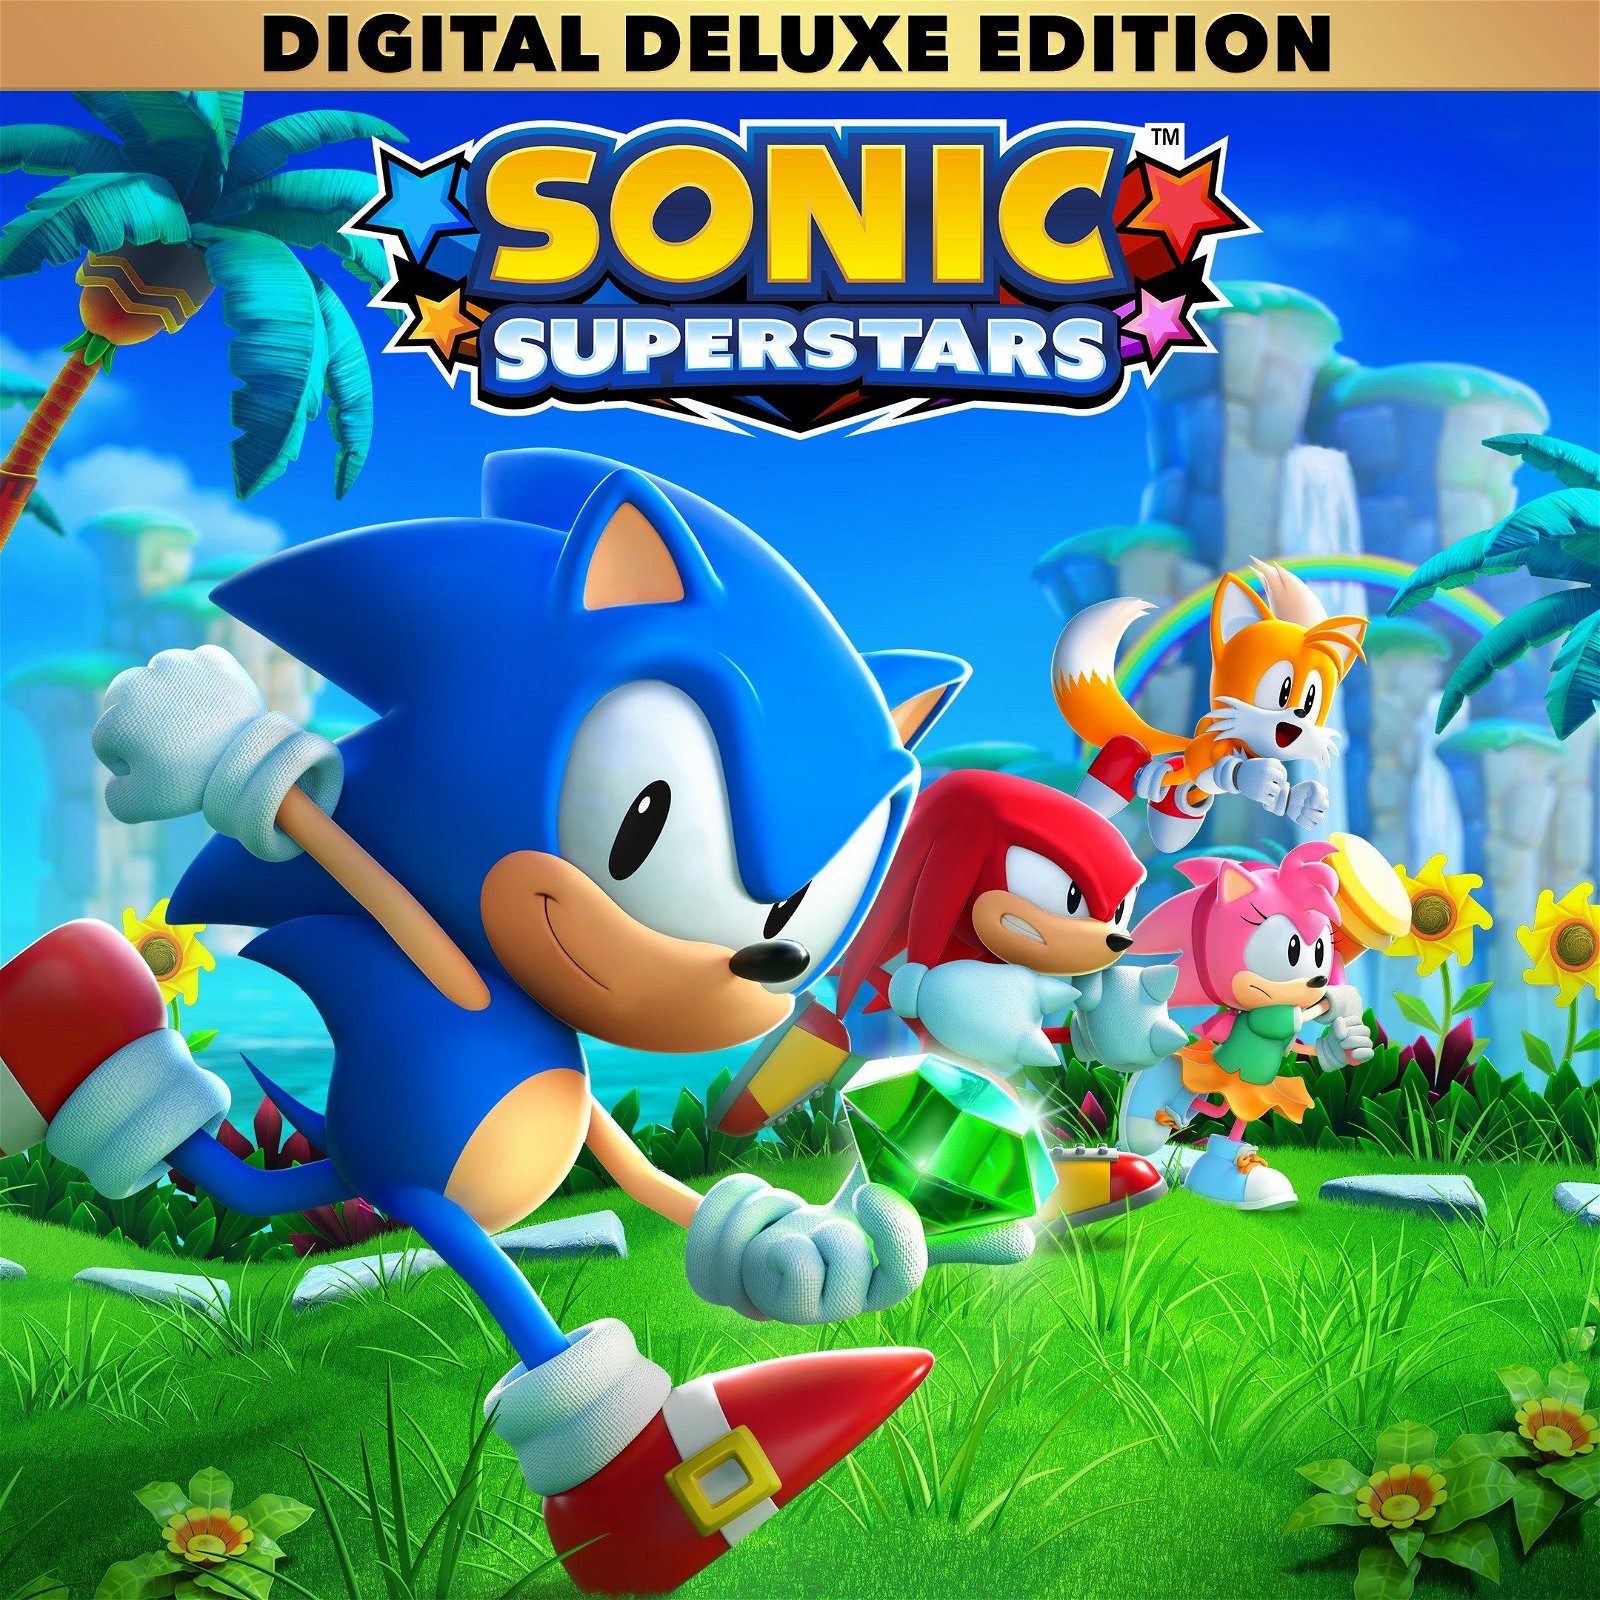 Image of SONIC SUPERSTARS Digital Deluxe Edition featuring LEGO